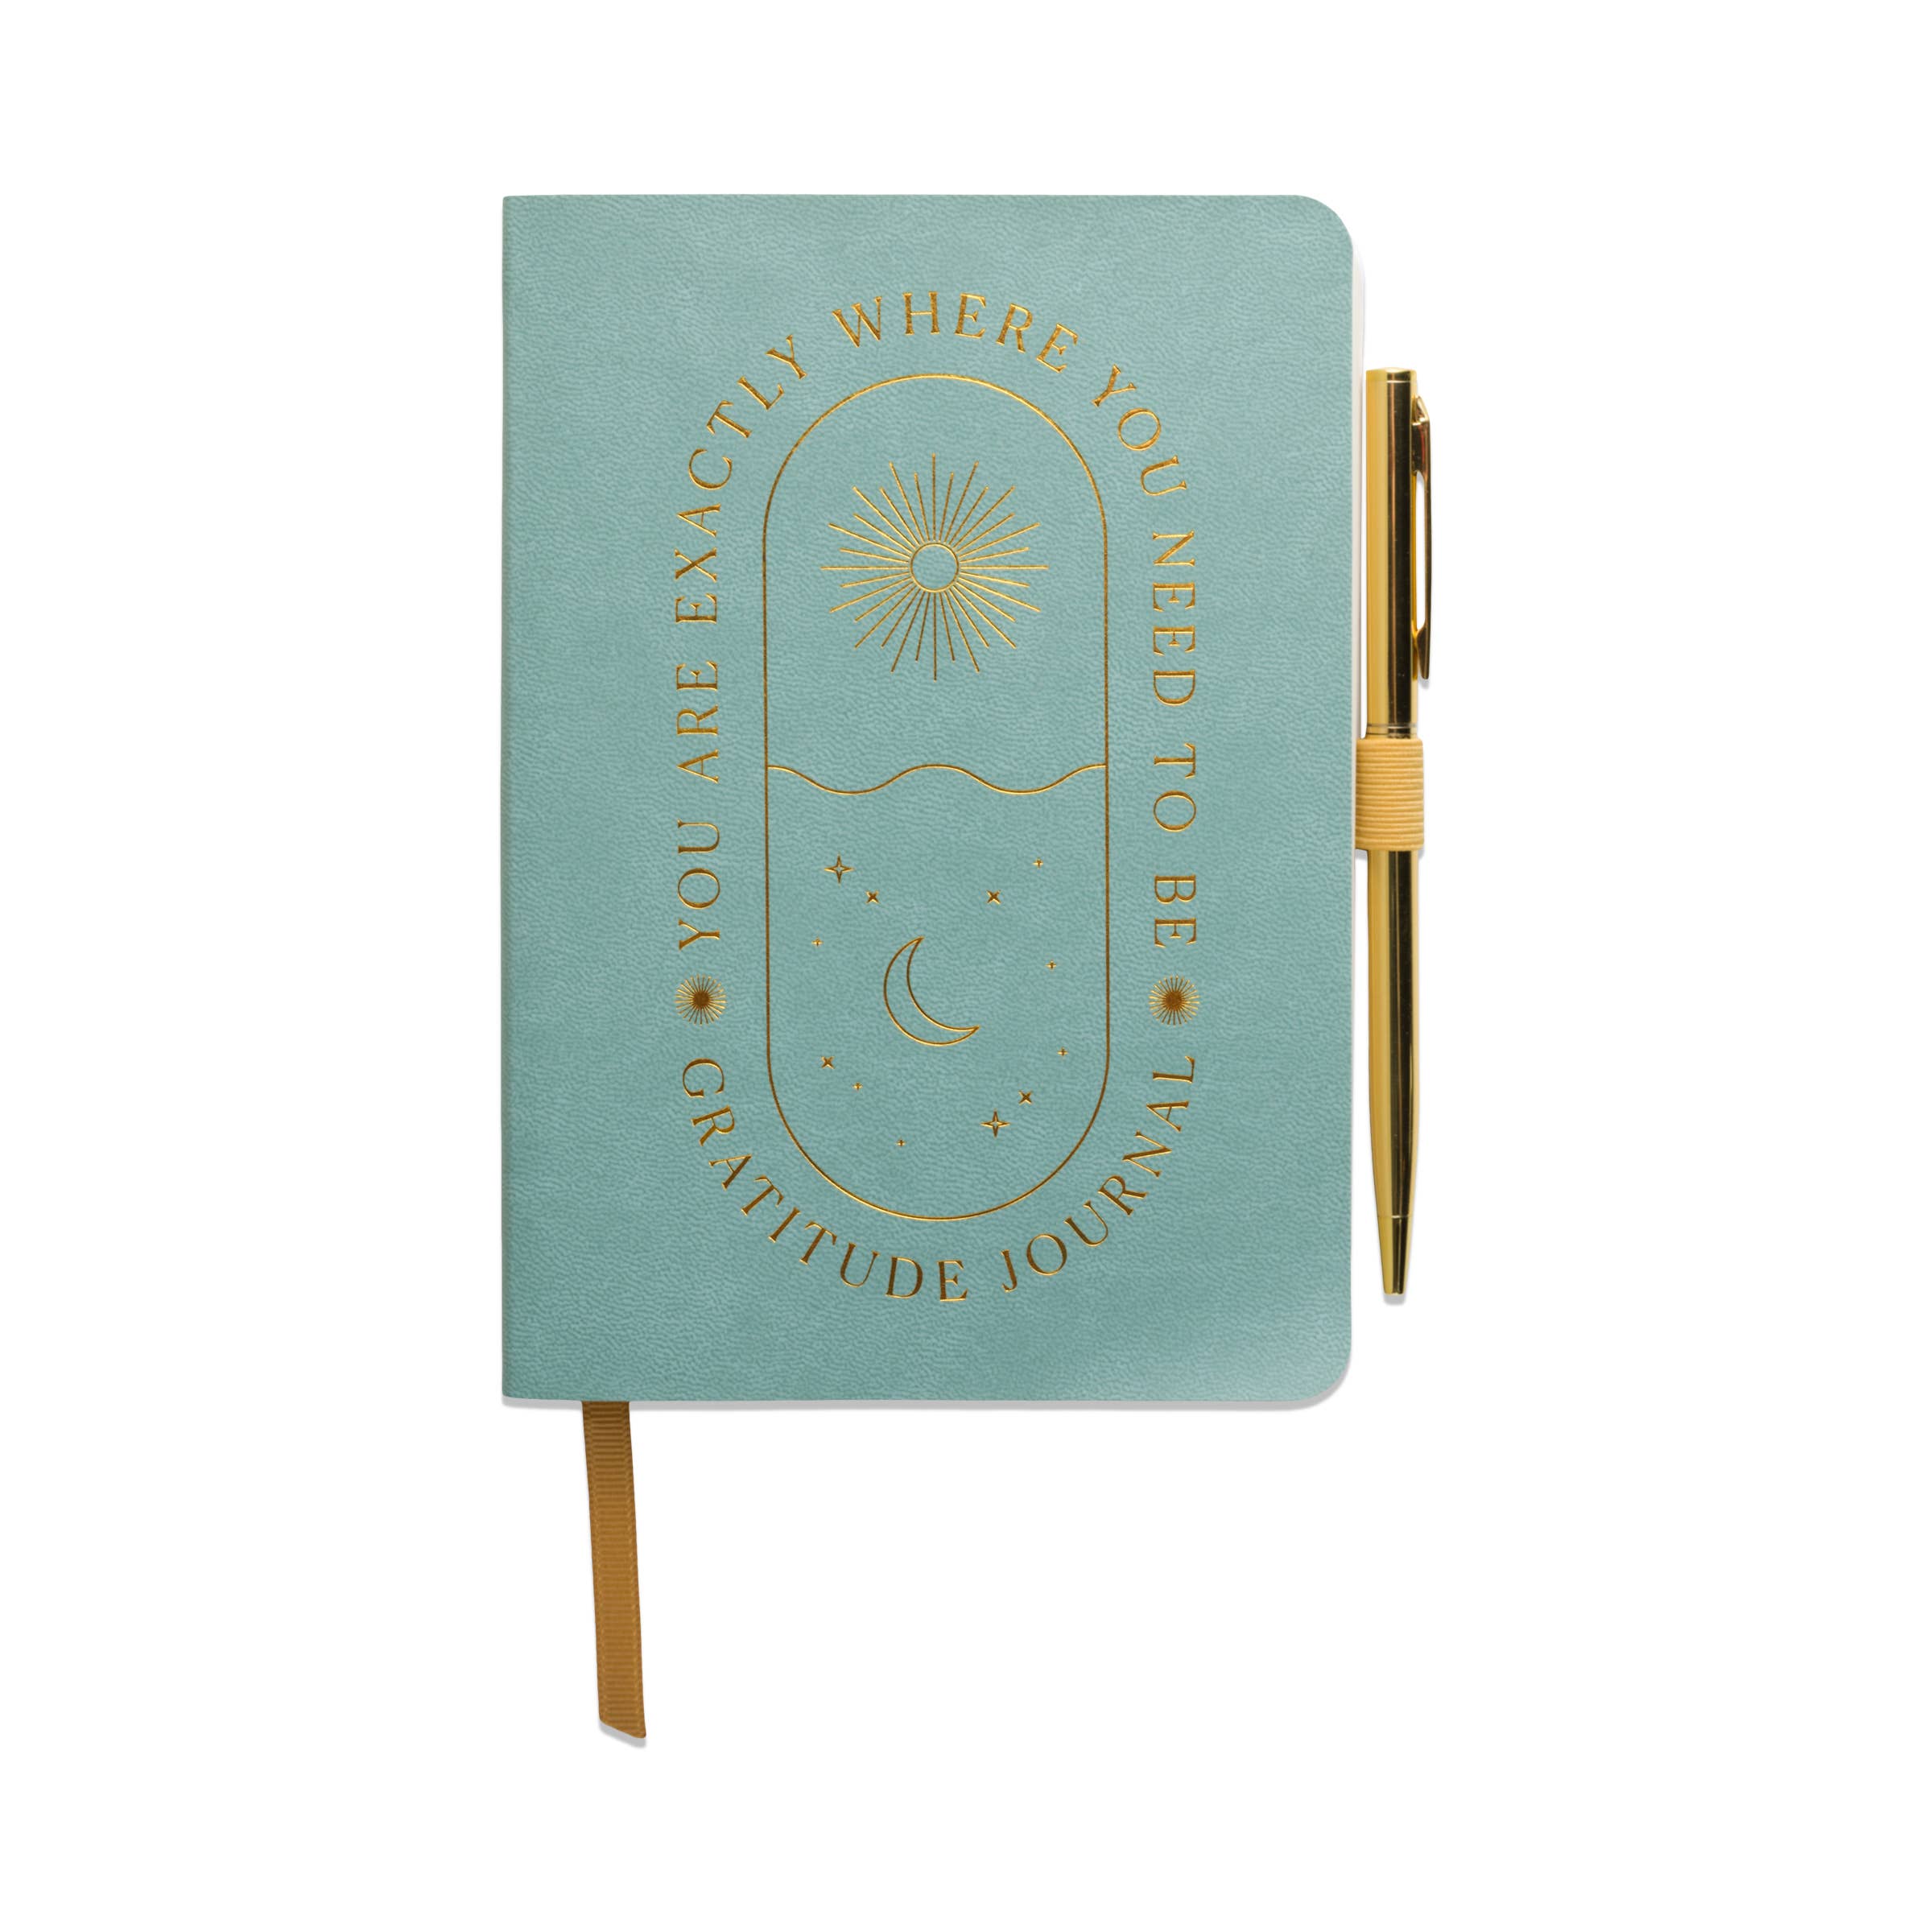 Gratitude Journal - Where You Need To Be Notebooks + Journals